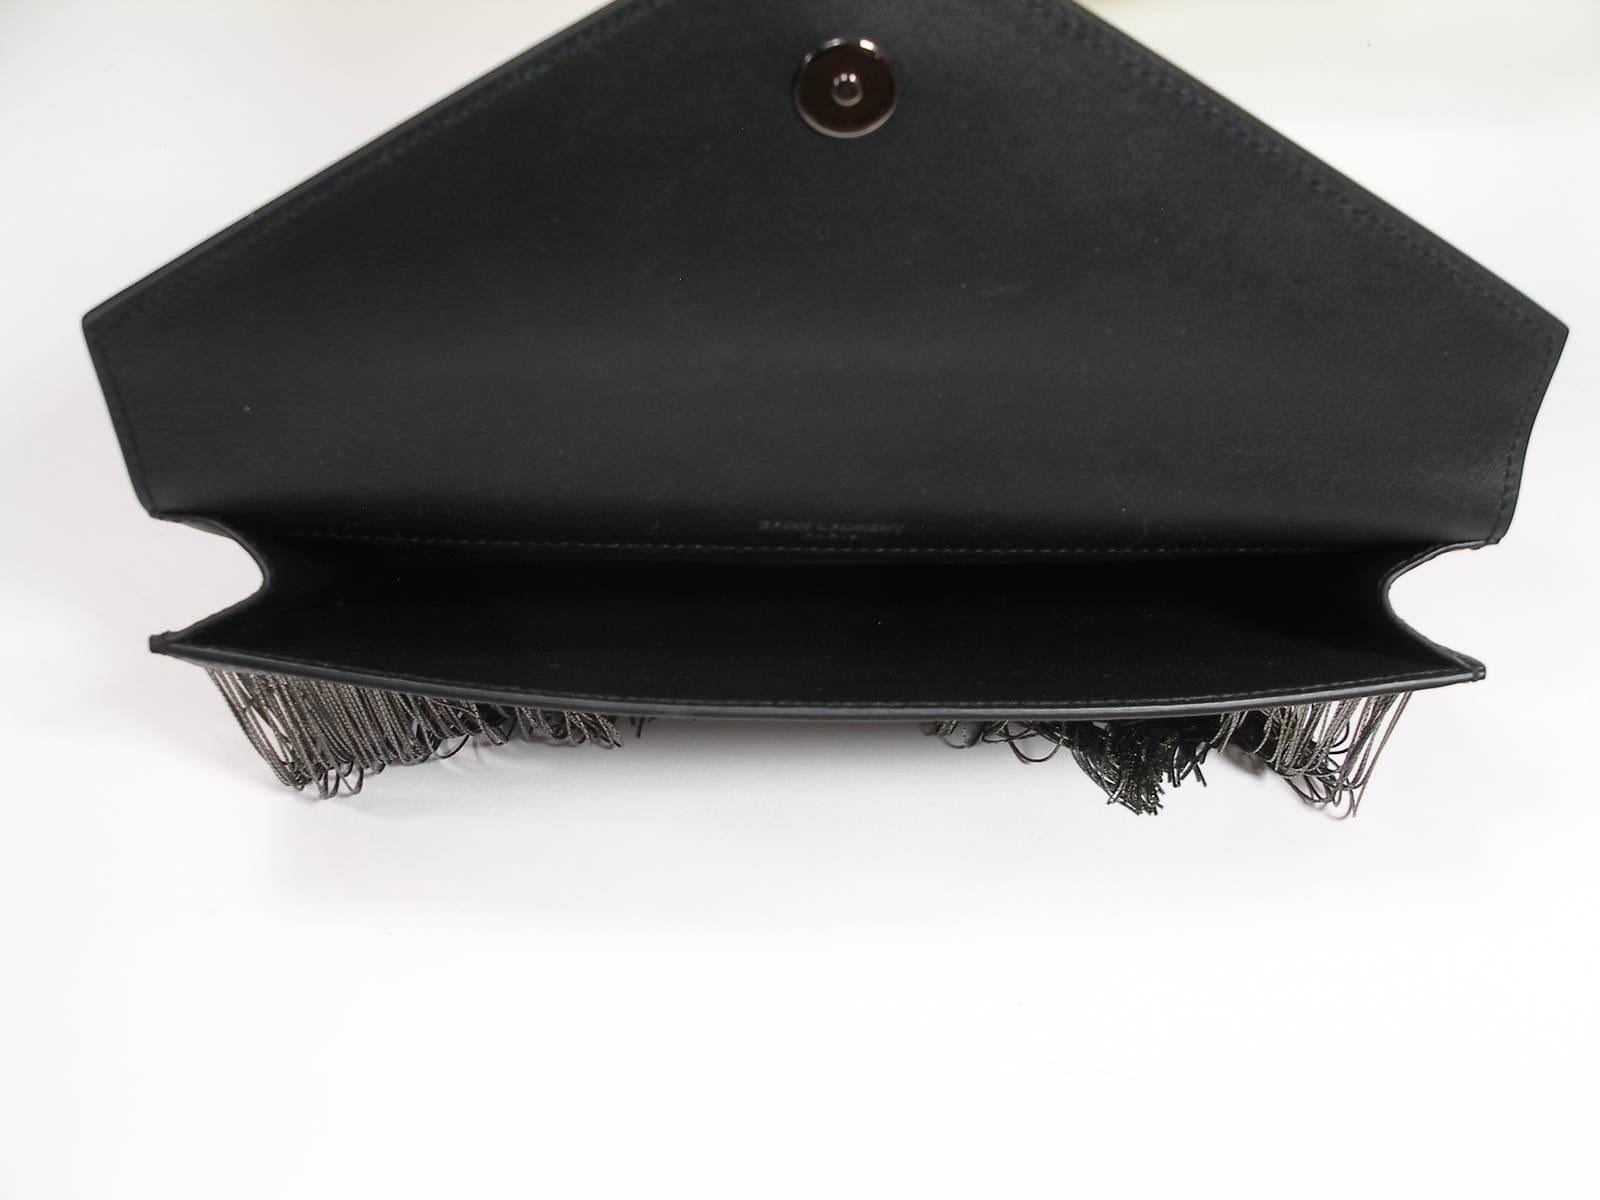 Yves Saint Laurent Le Sept Fringed Pouch in black leather / SOLD OUT in shop YSL For Sale 6